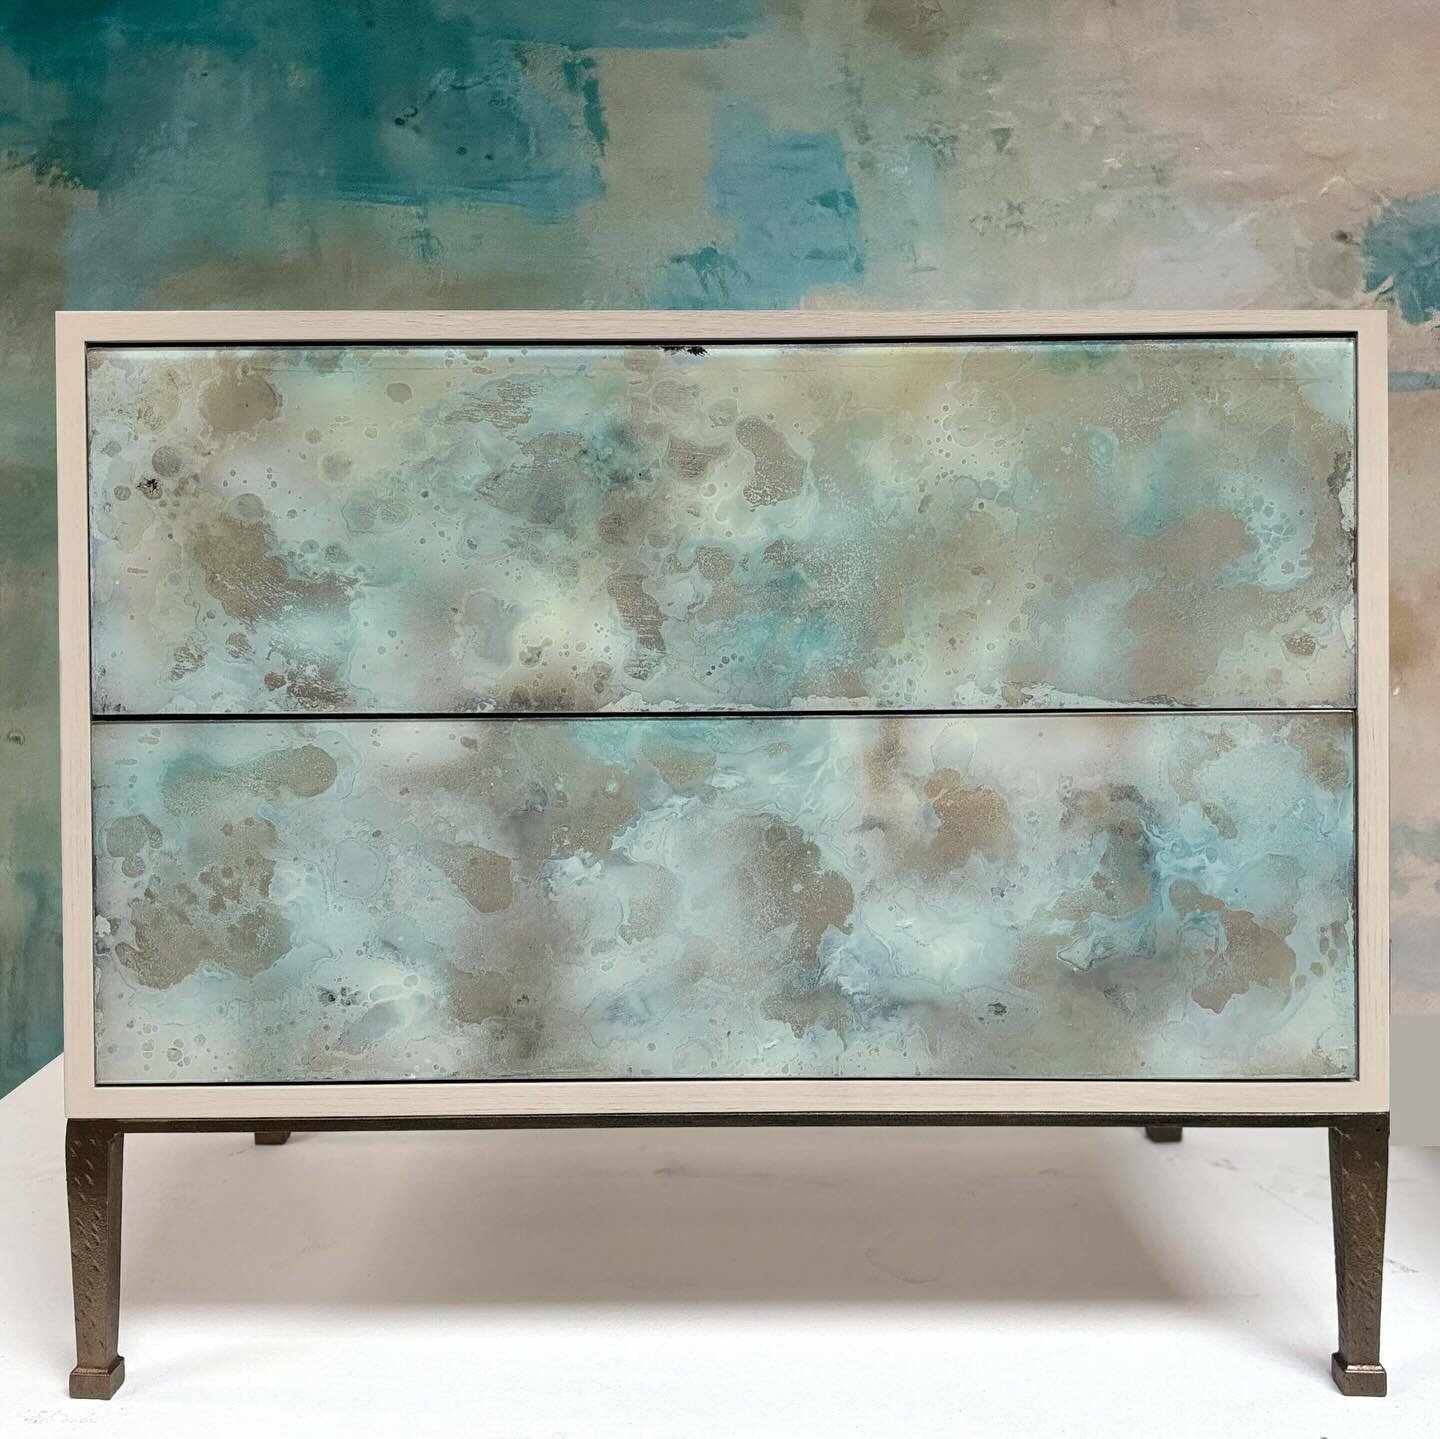 Wishing a Happy Easter 🐇 from everyone at Ercole Home! 🐰We&rsquo;re getting ready for springtime&rsquo;s blue skies with this pair of Two Drawer Nightstands, with a Milano metal base, Rift Oak in a painted Champagne finish, and drawerfronts covered